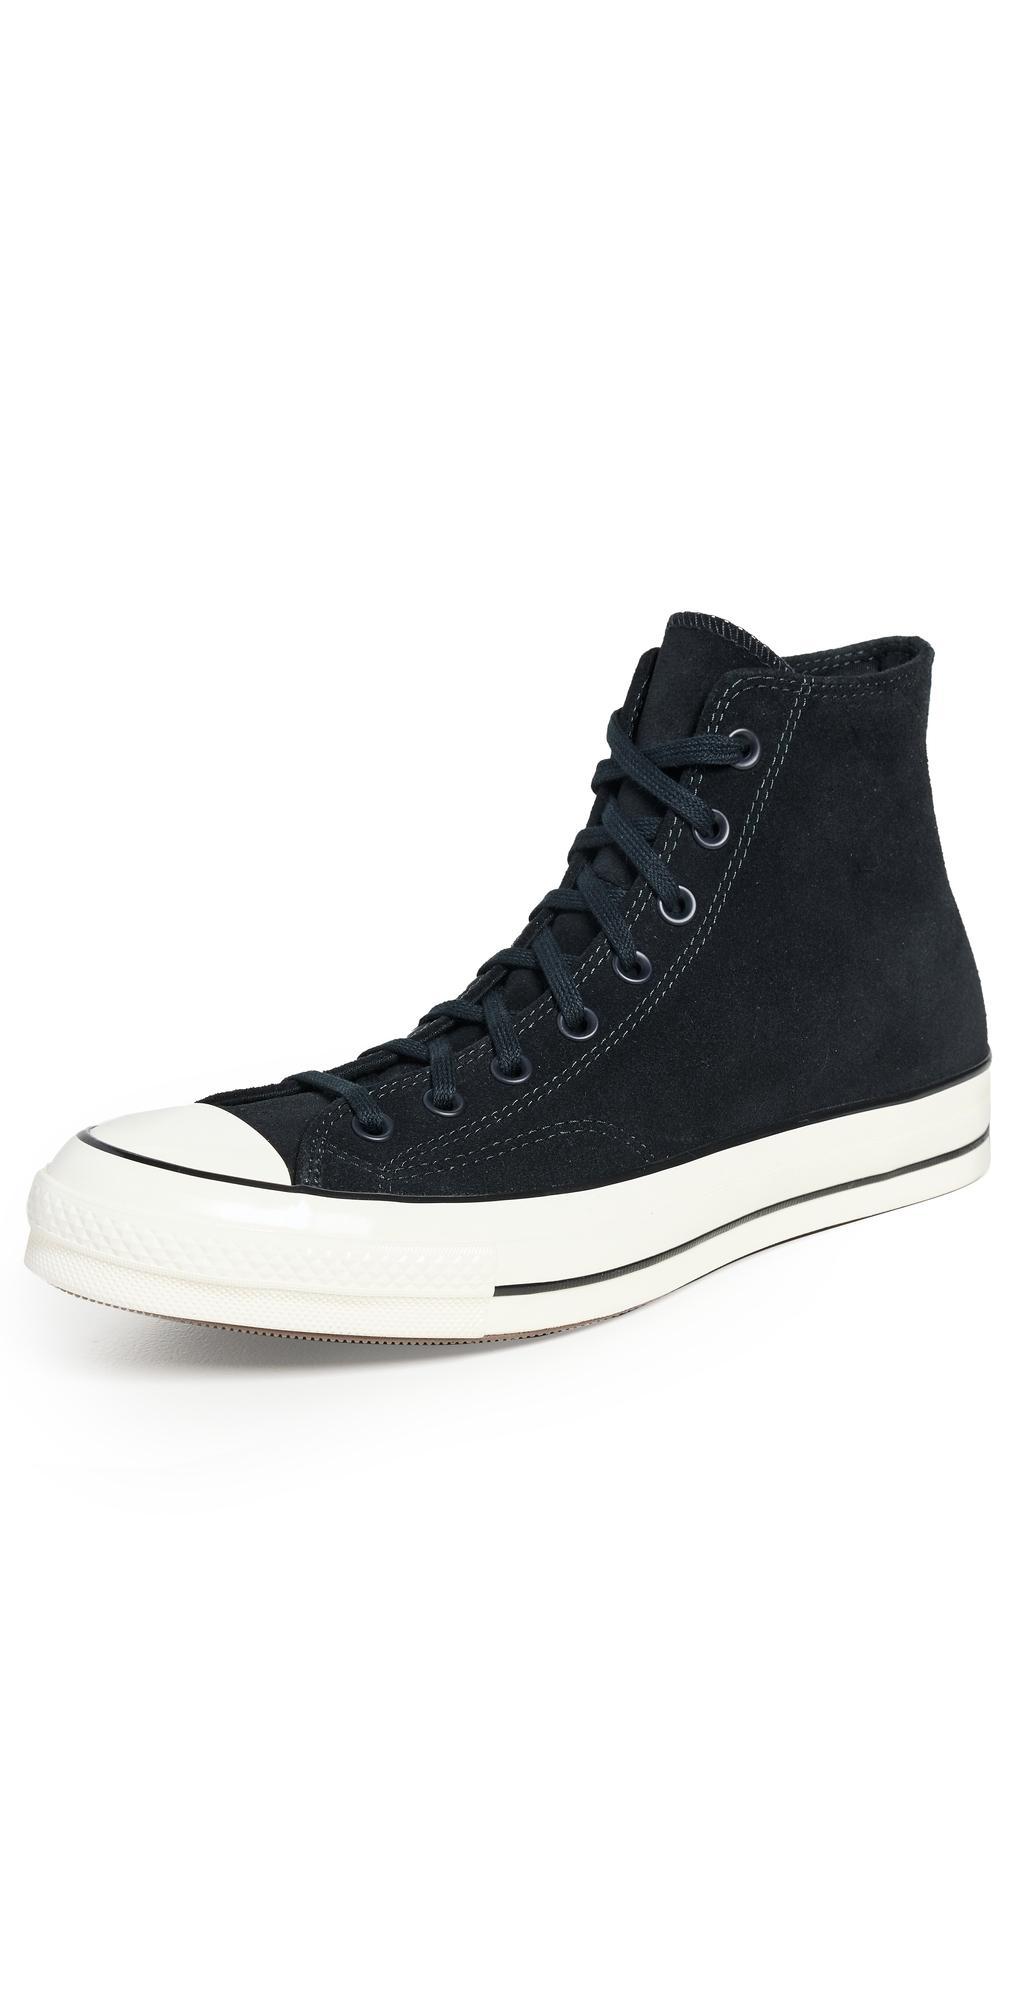 Converse Gender Inclusive Chuck Taylor All Star 70 Suede High Top Sneaker Product Image